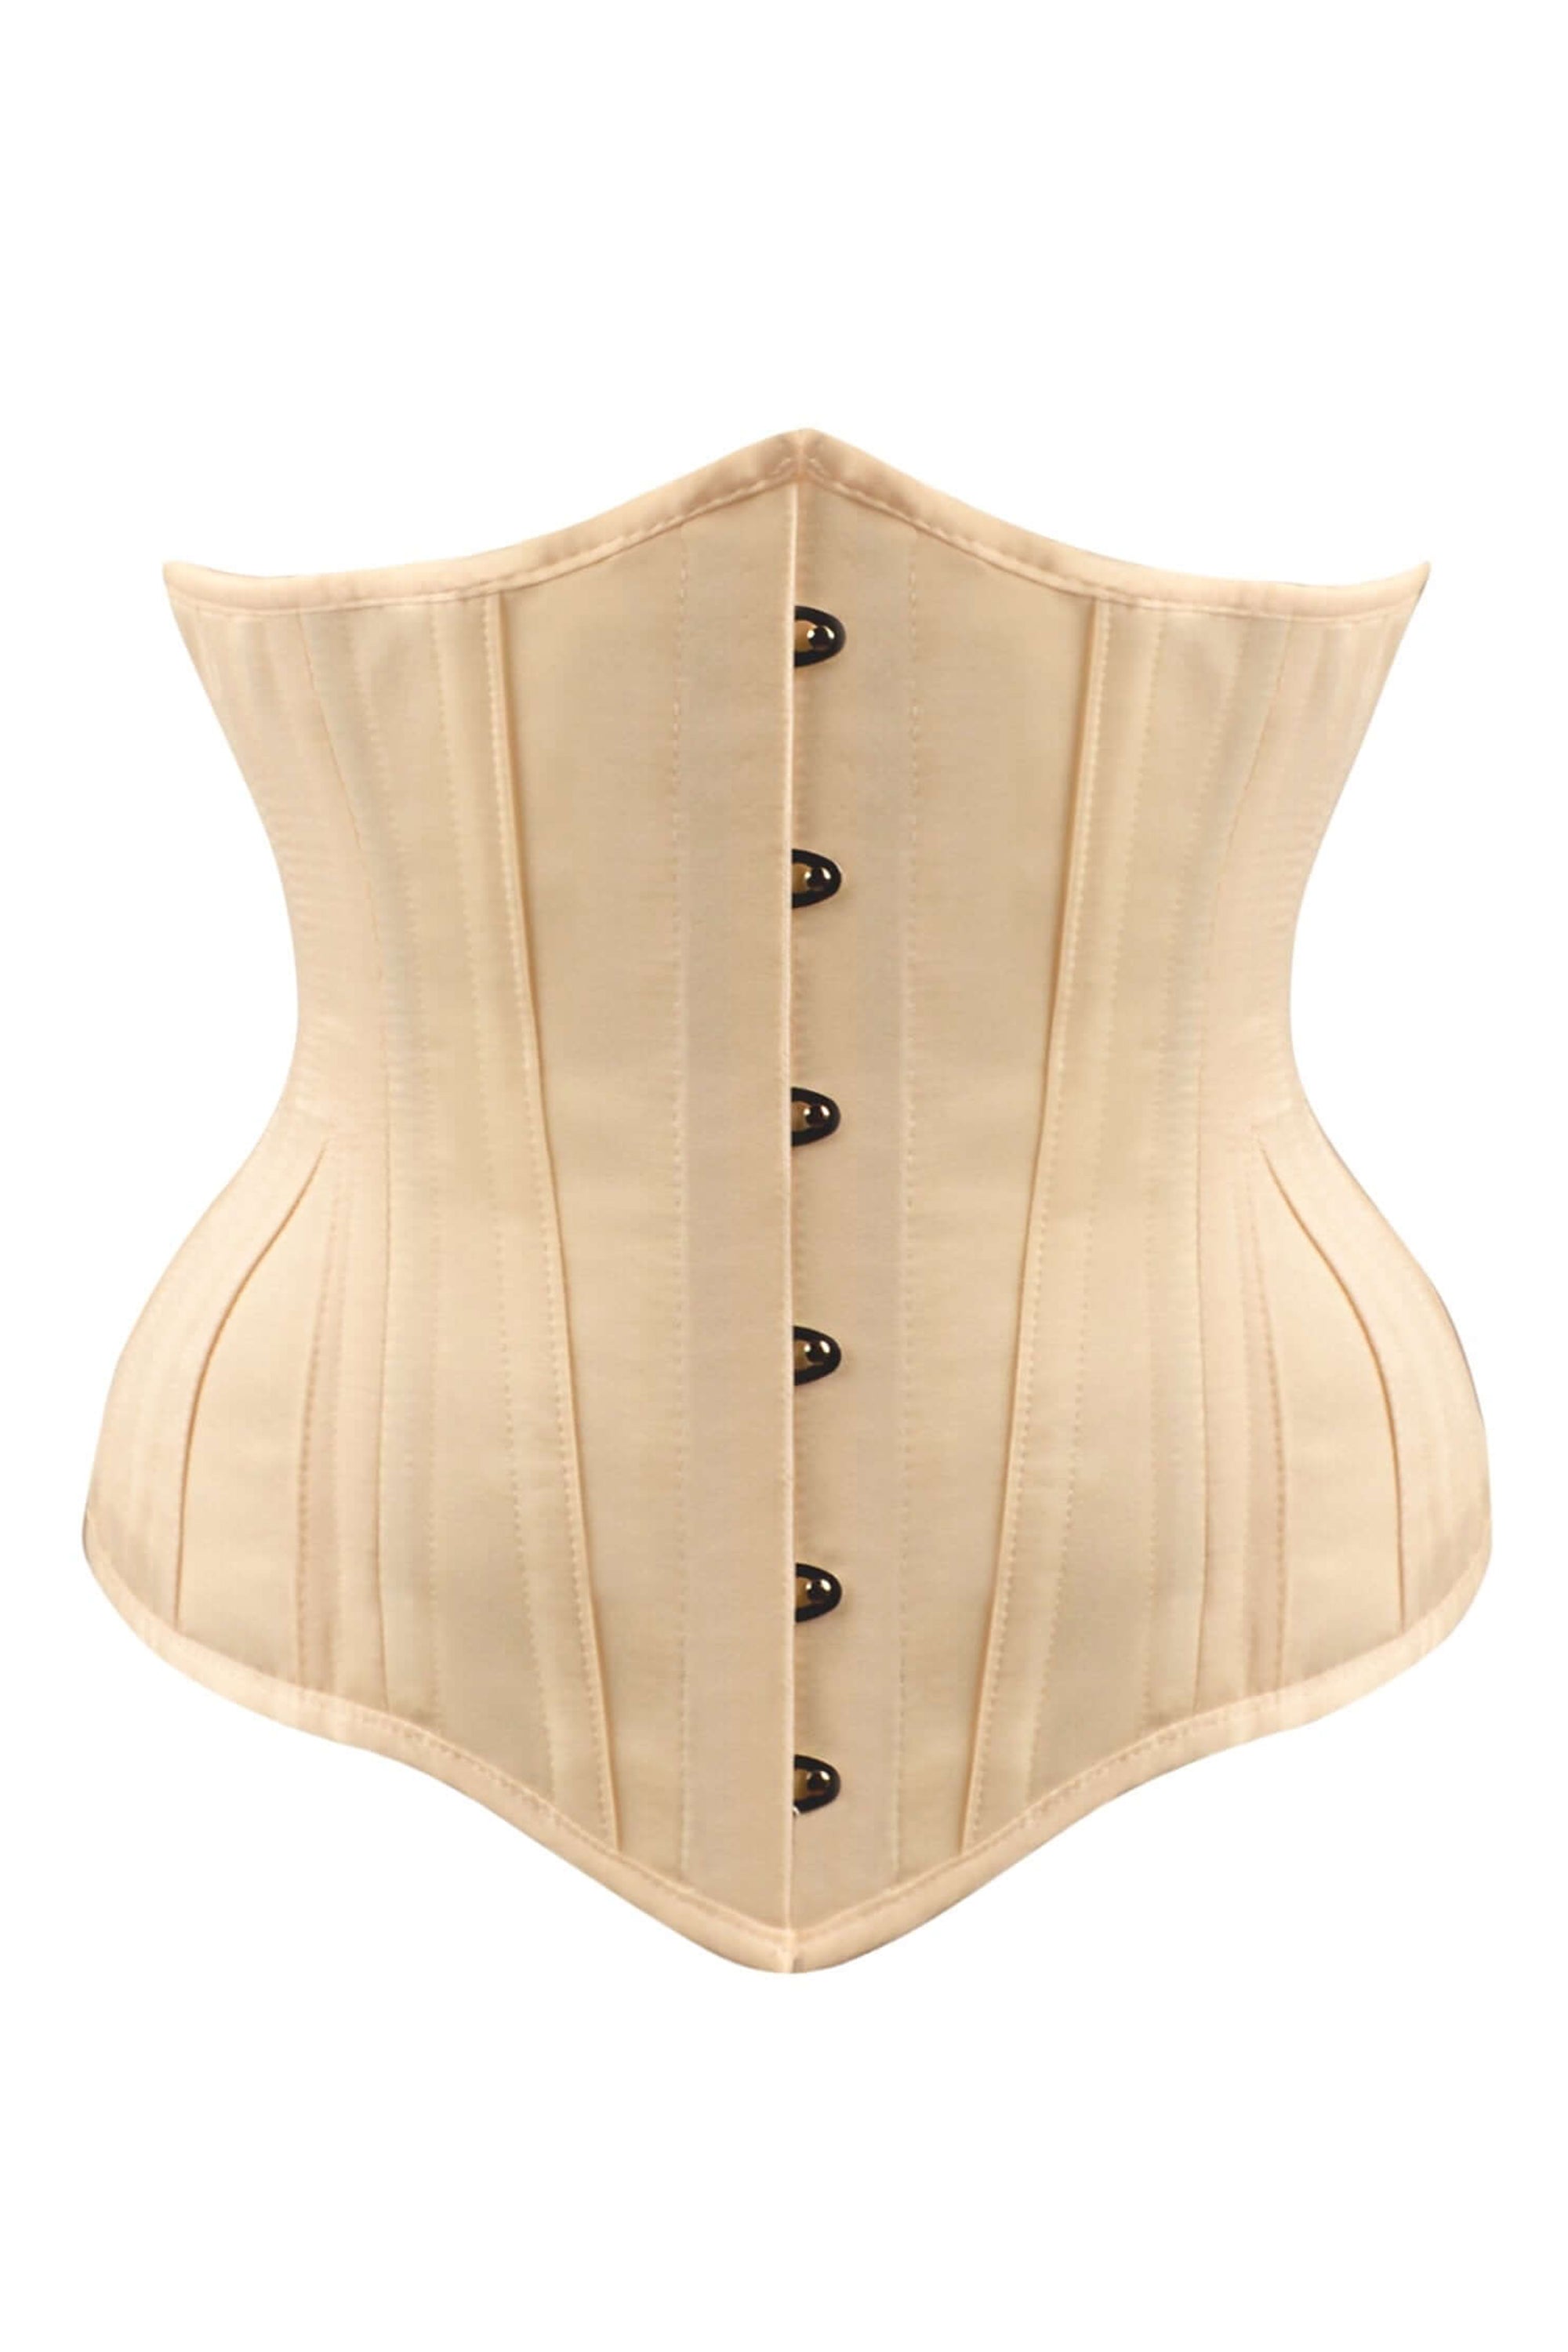 Black Cotton Twill Classic Overbust Waist Trainer With Hip Gores